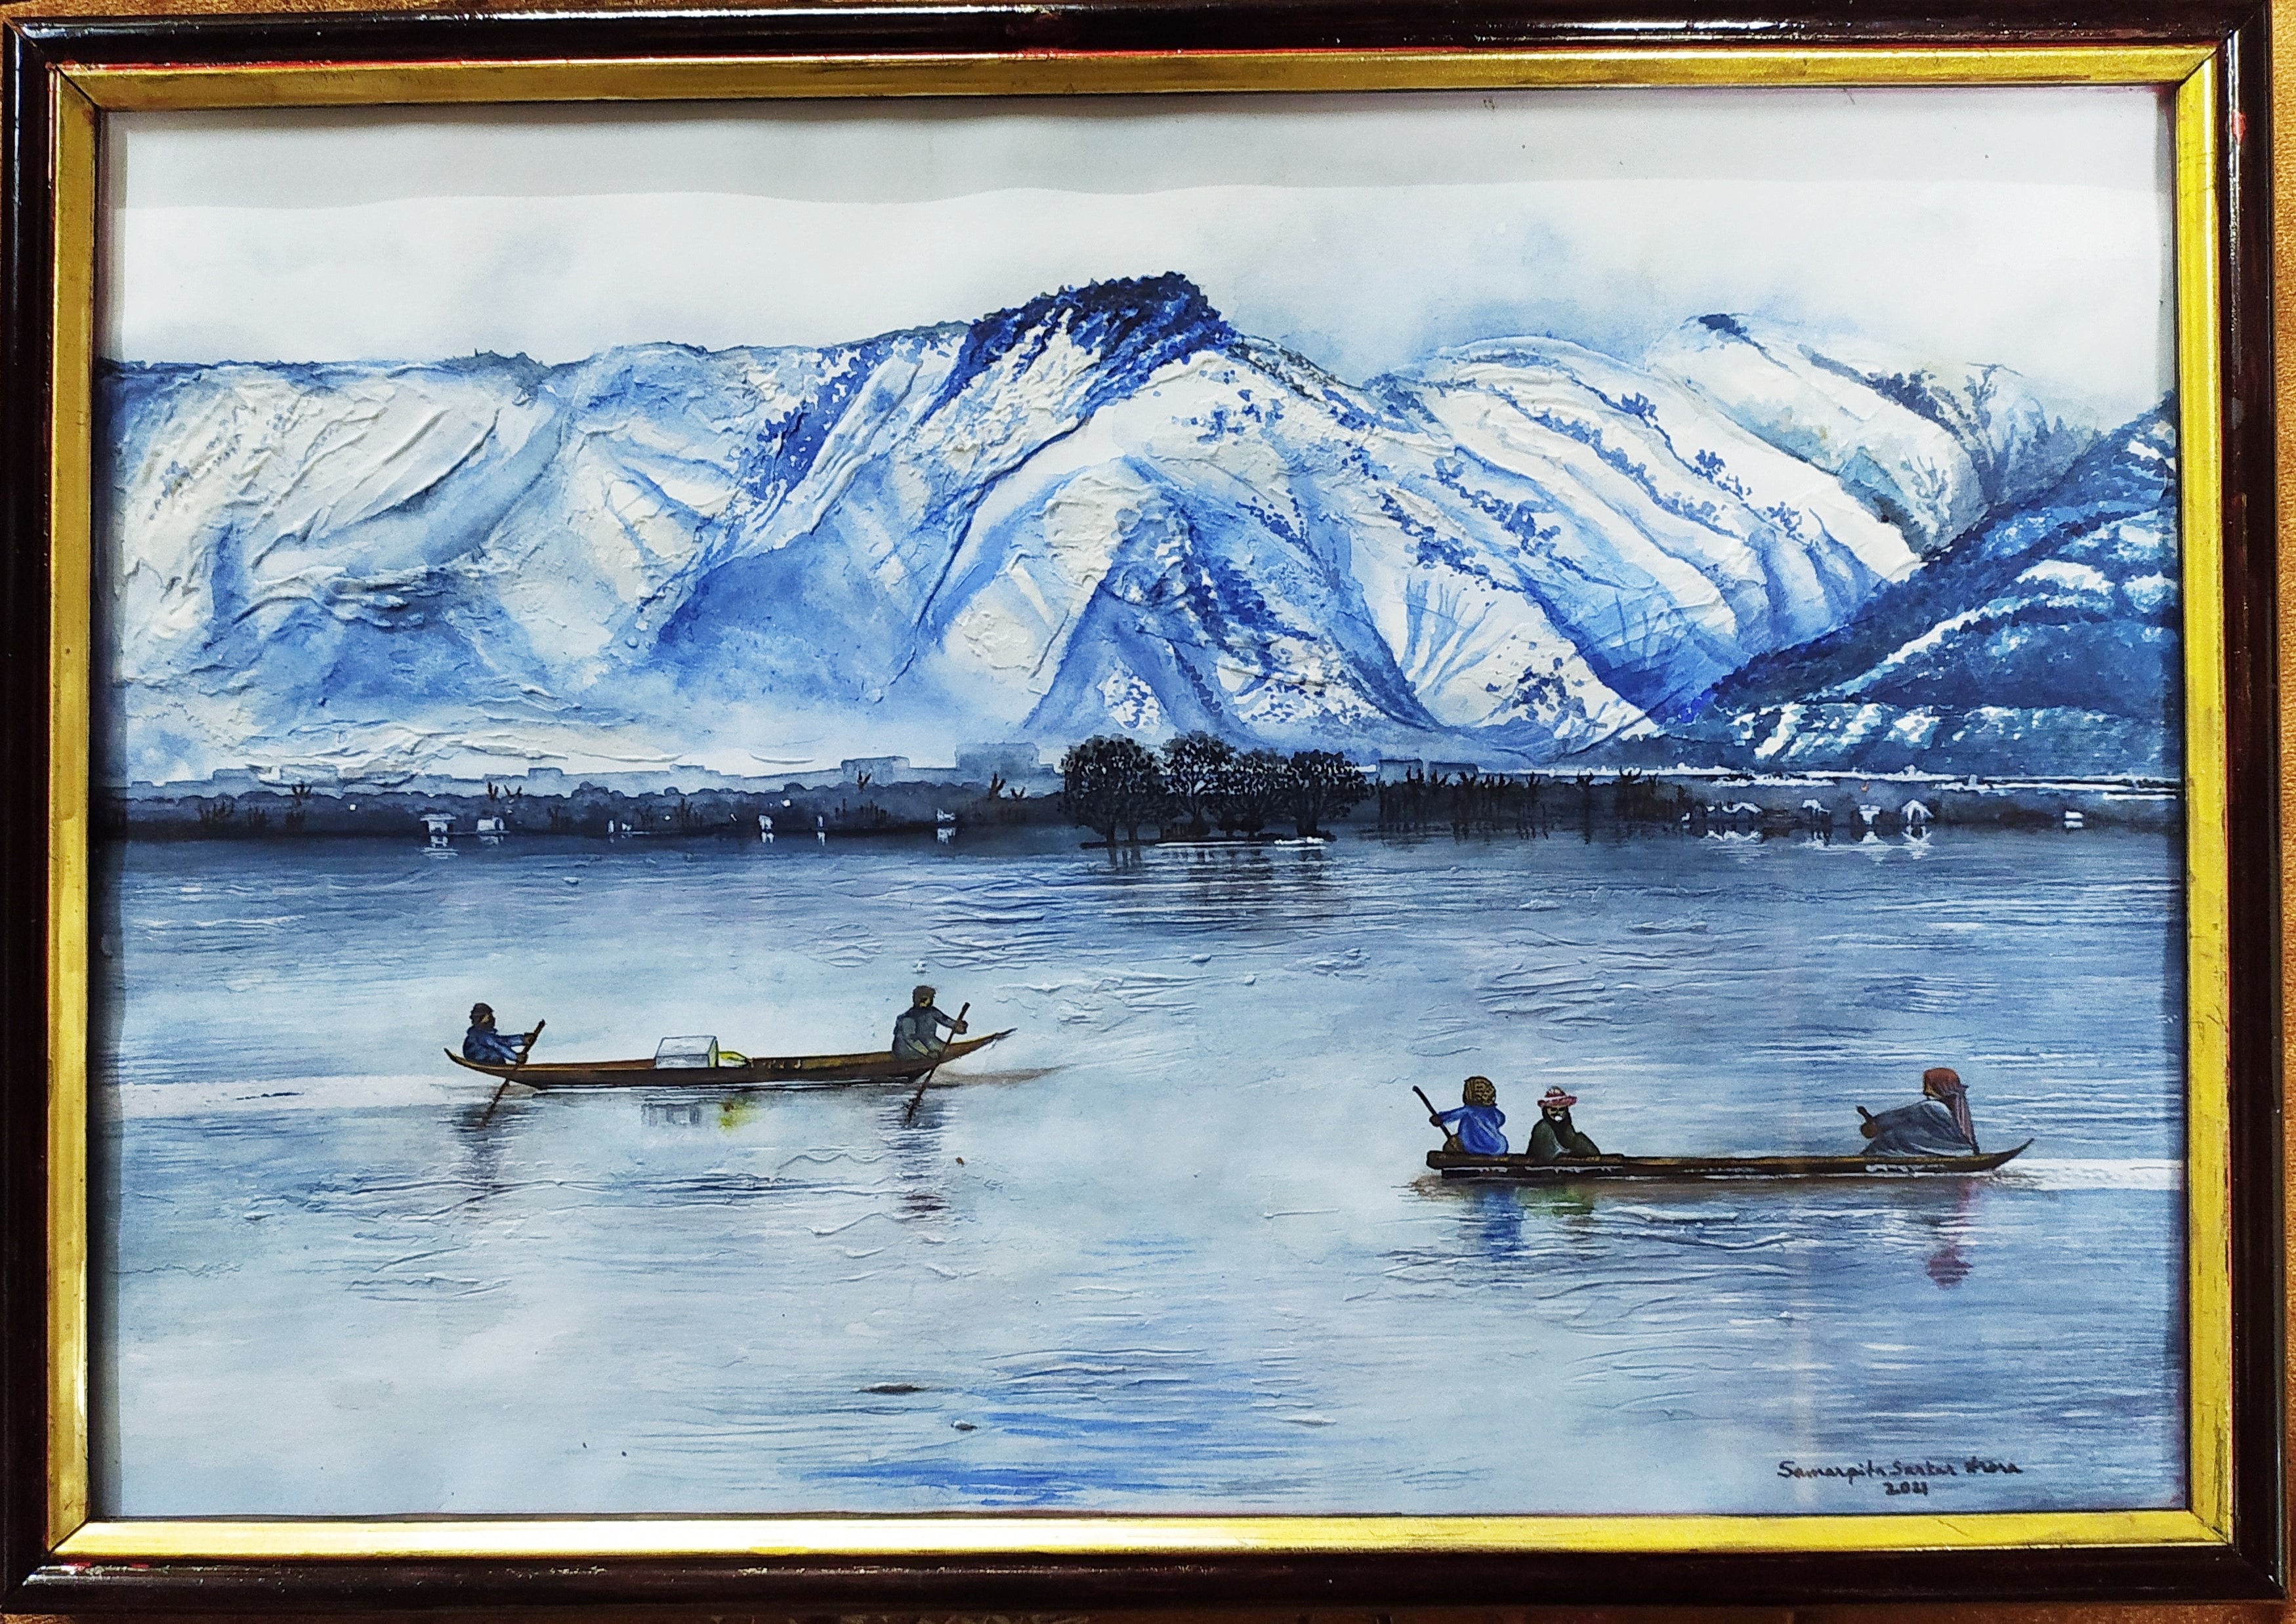 Download free photo of Ink drawing,traditional media,dal lake,india,kashmir  - from needpix.com